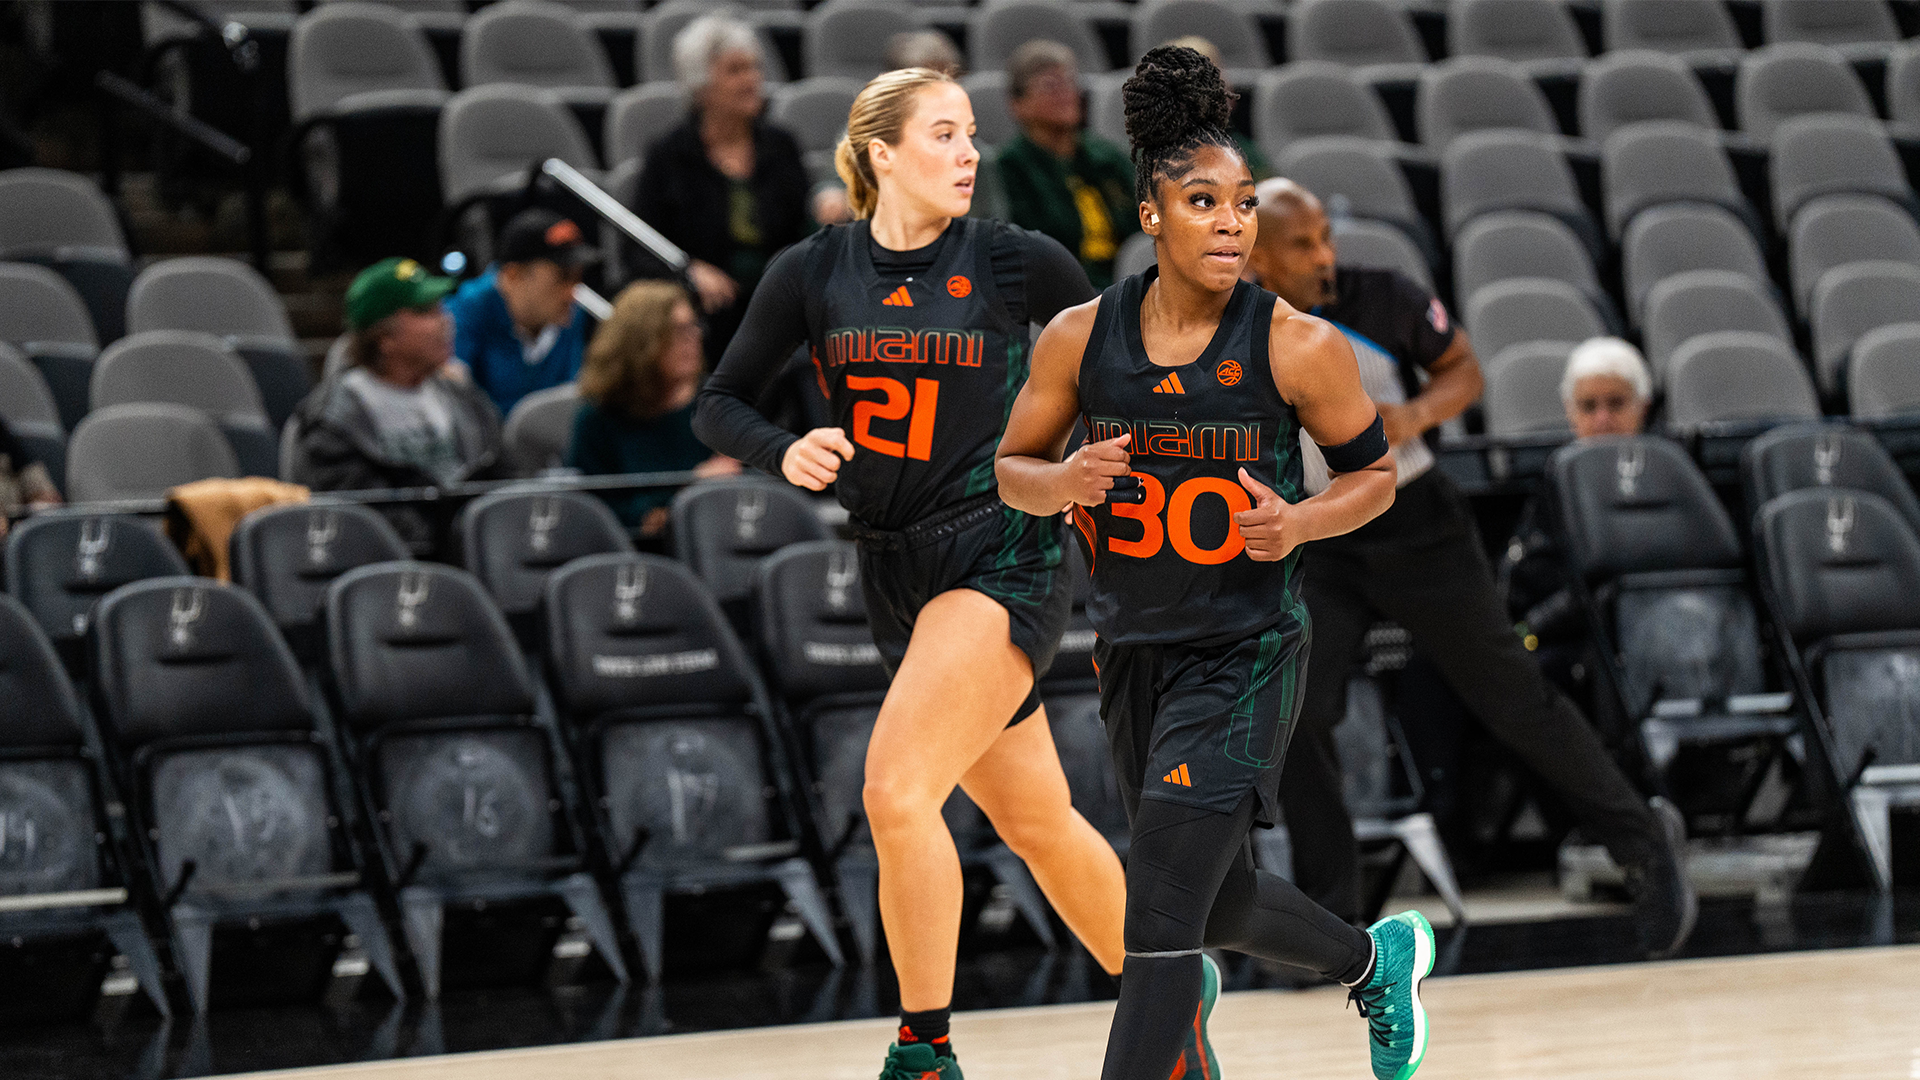 Canes Have Winning Streak Snapped Against No. 10/13 Baylor